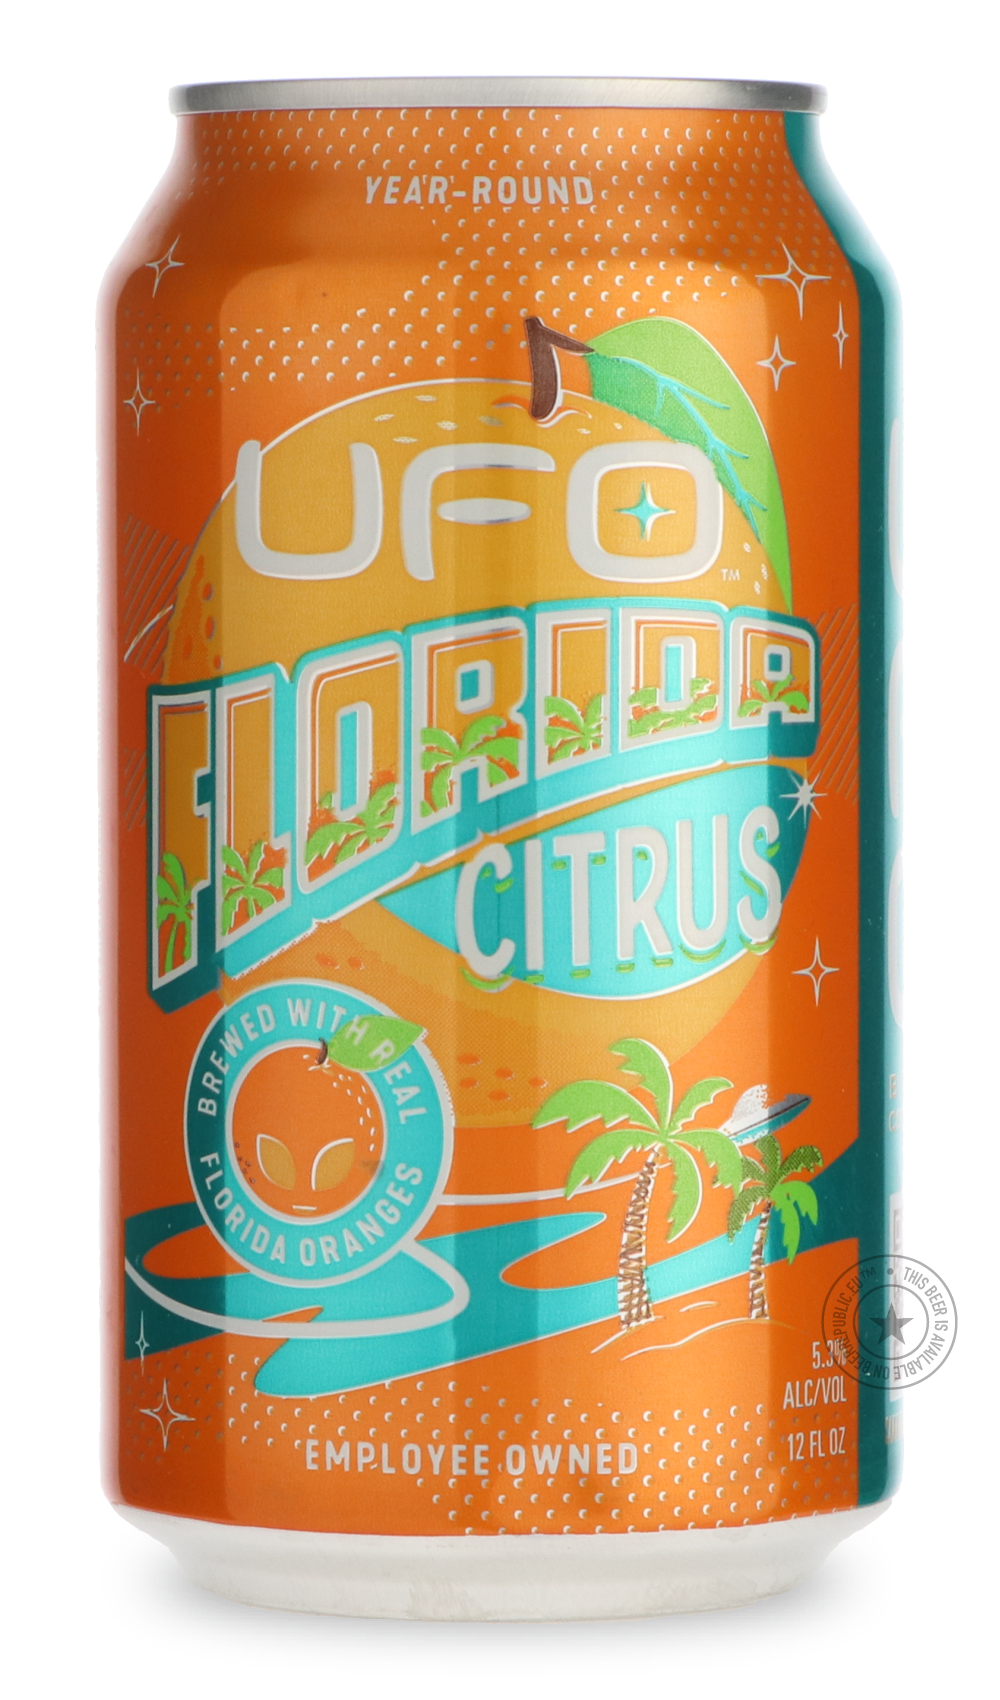 -Harpoon- UFO Florida Citrus-Wit / Weizen / Wheat- Only @ Beer Republic - The best online beer store for American & Canadian craft beer - Buy beer online from the USA and Canada - Bier online kopen - Amerikaans bier kopen - Craft beer store - Craft beer kopen - Amerikanisch bier kaufen - Bier online kaufen - Acheter biere online - IPA - Stout - Porter - New England IPA - Hazy IPA - Imperial Stout - Barrel Aged - Barrel Aged Imperial Stout - Brown - Dark beer - Blond - Blonde - Pilsner - Lager - Wheat - Weiz